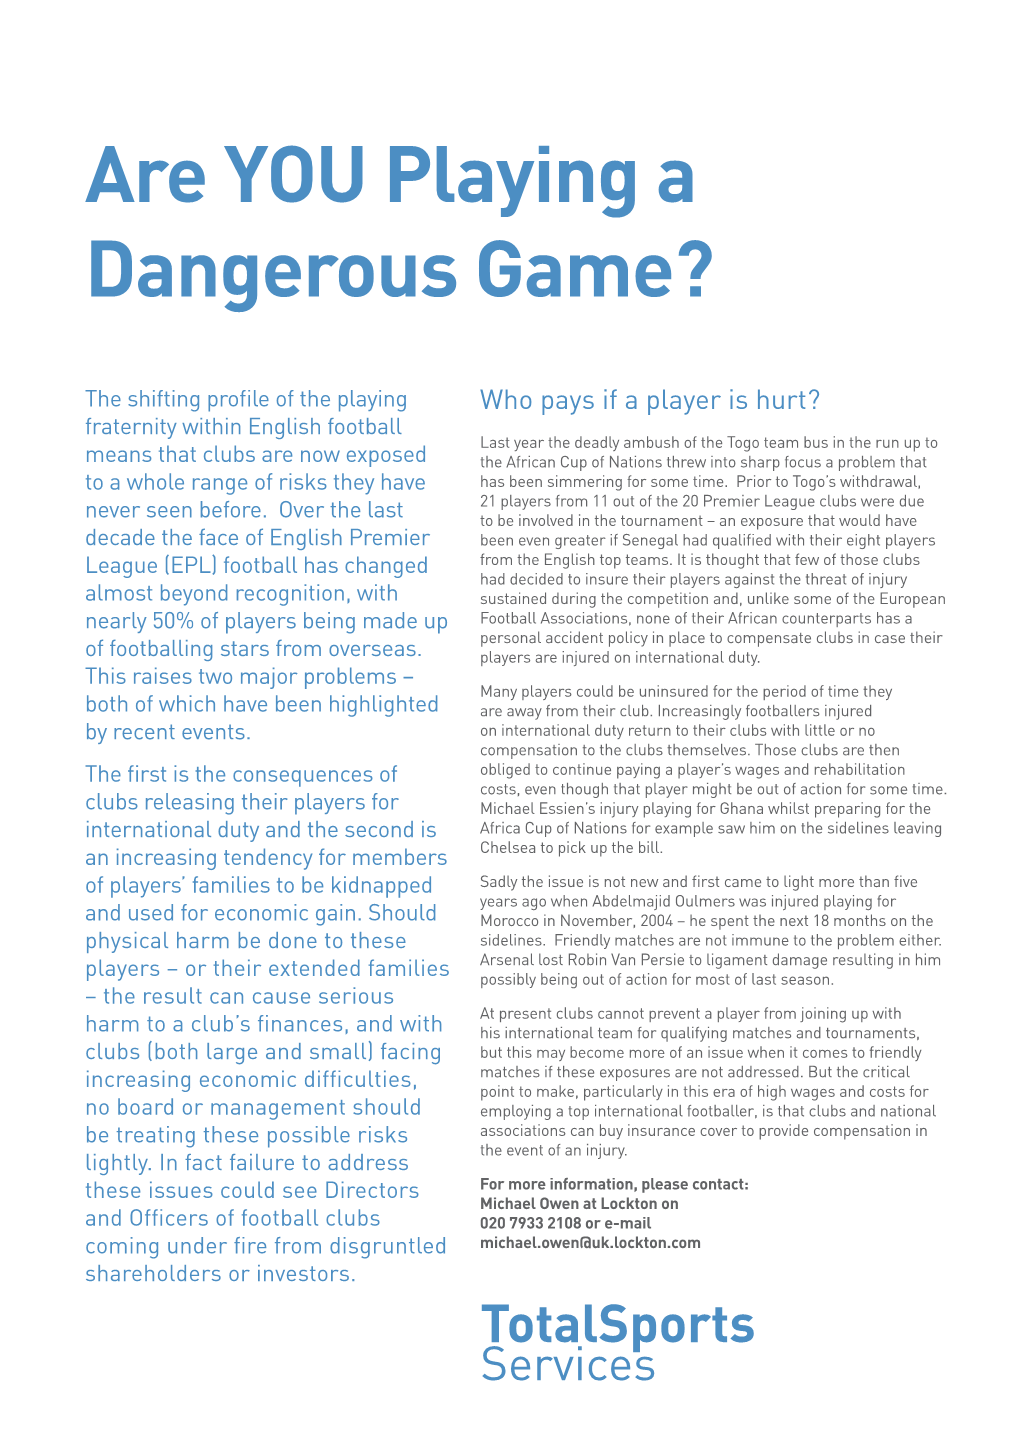 Are YOU Playing a Dangerous Game?